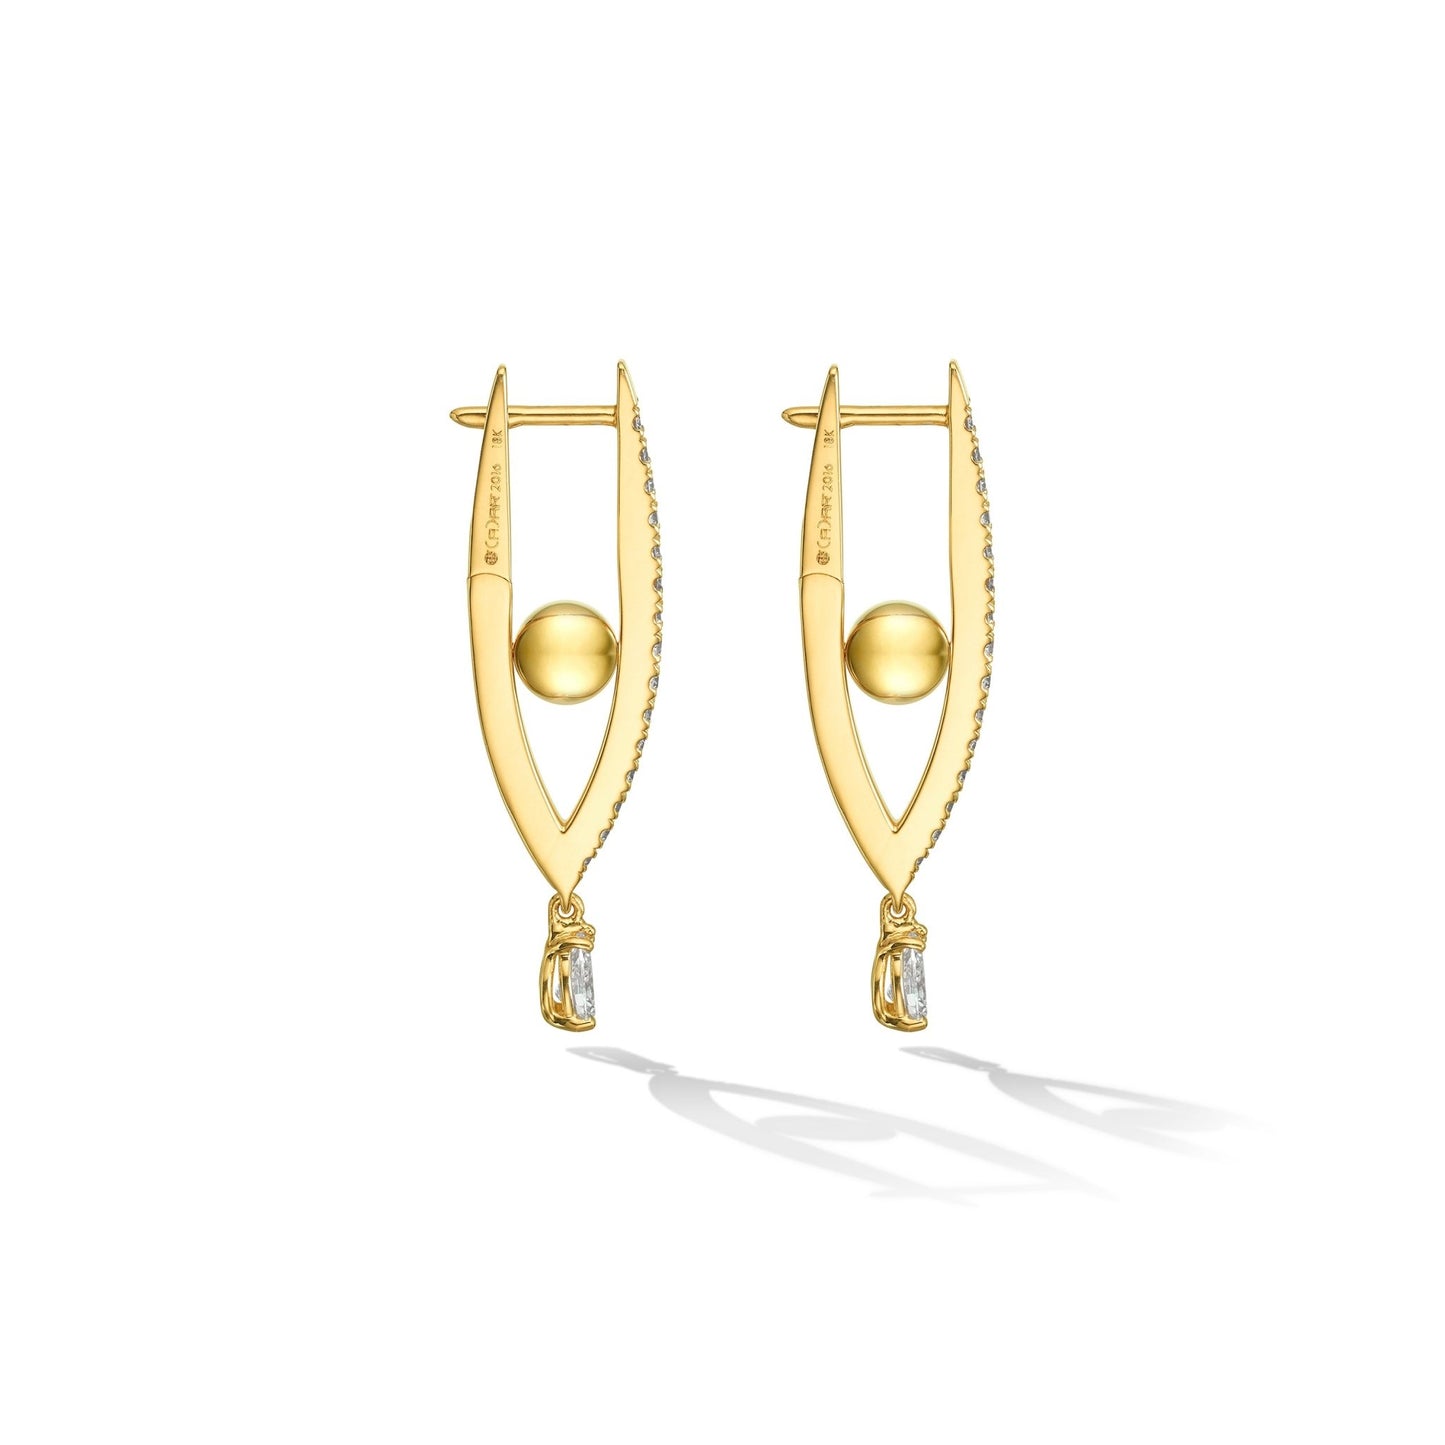 Small Yellow Gold Reflections Hoop Earrings with White Diamonds - Cadar